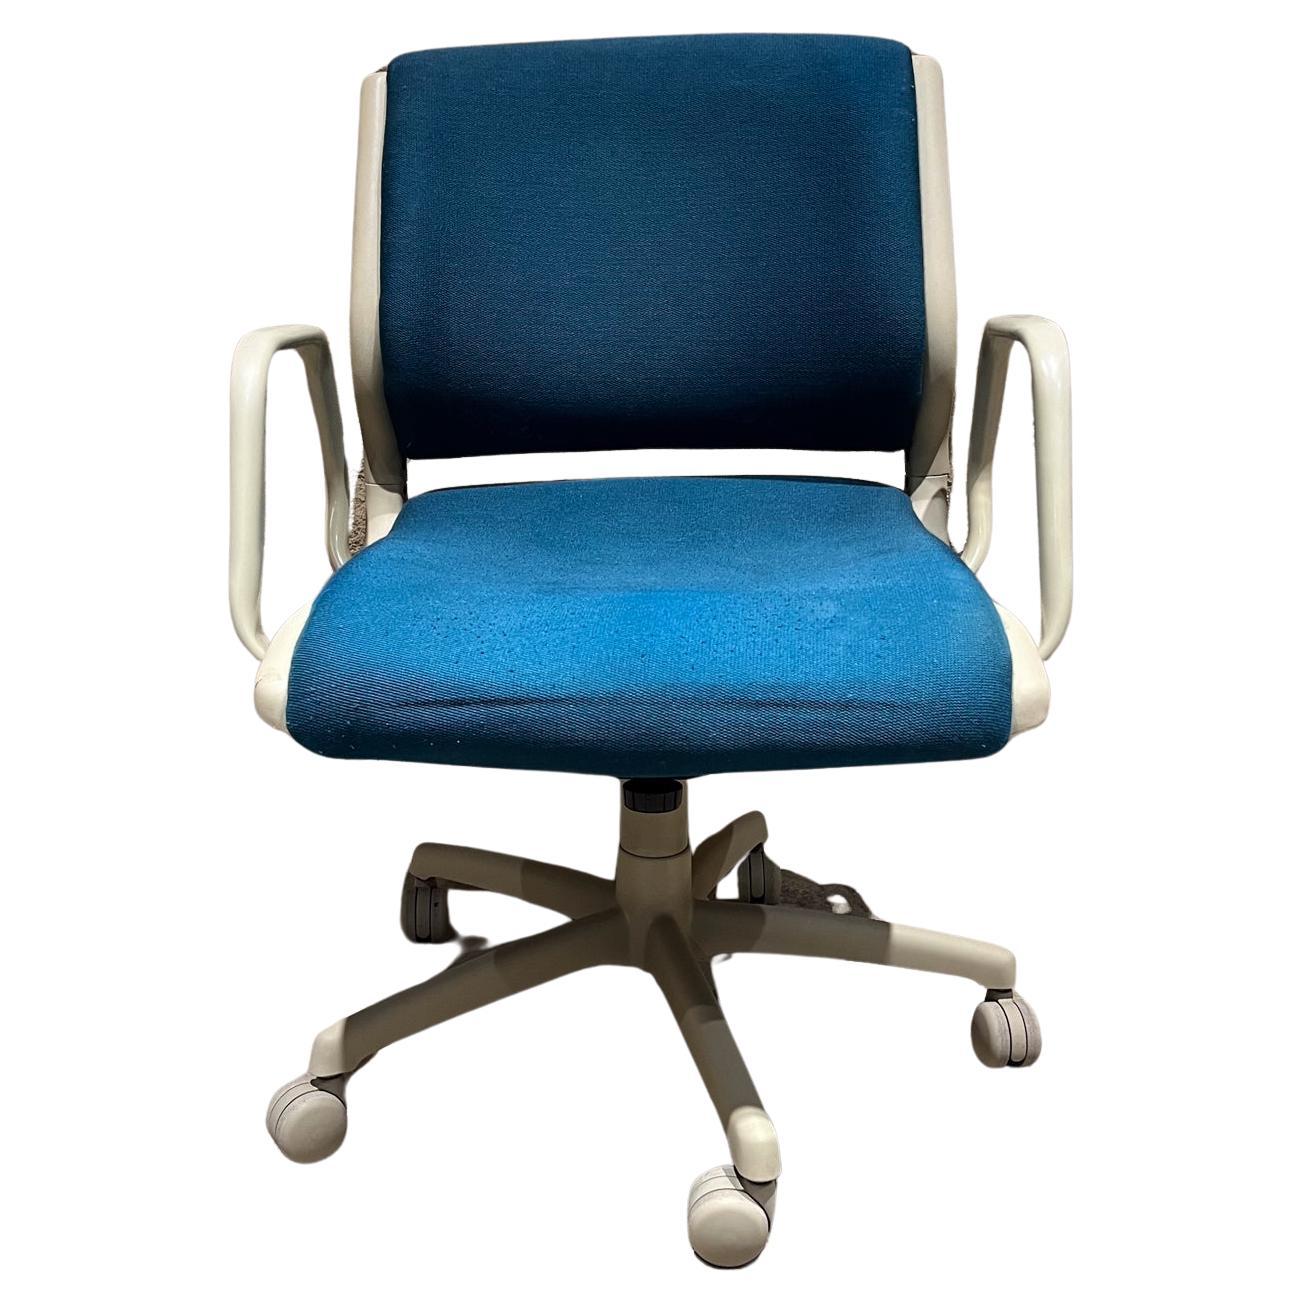 1990s Blue Steelcase Rolling Office Executive Desk Chair For Sale